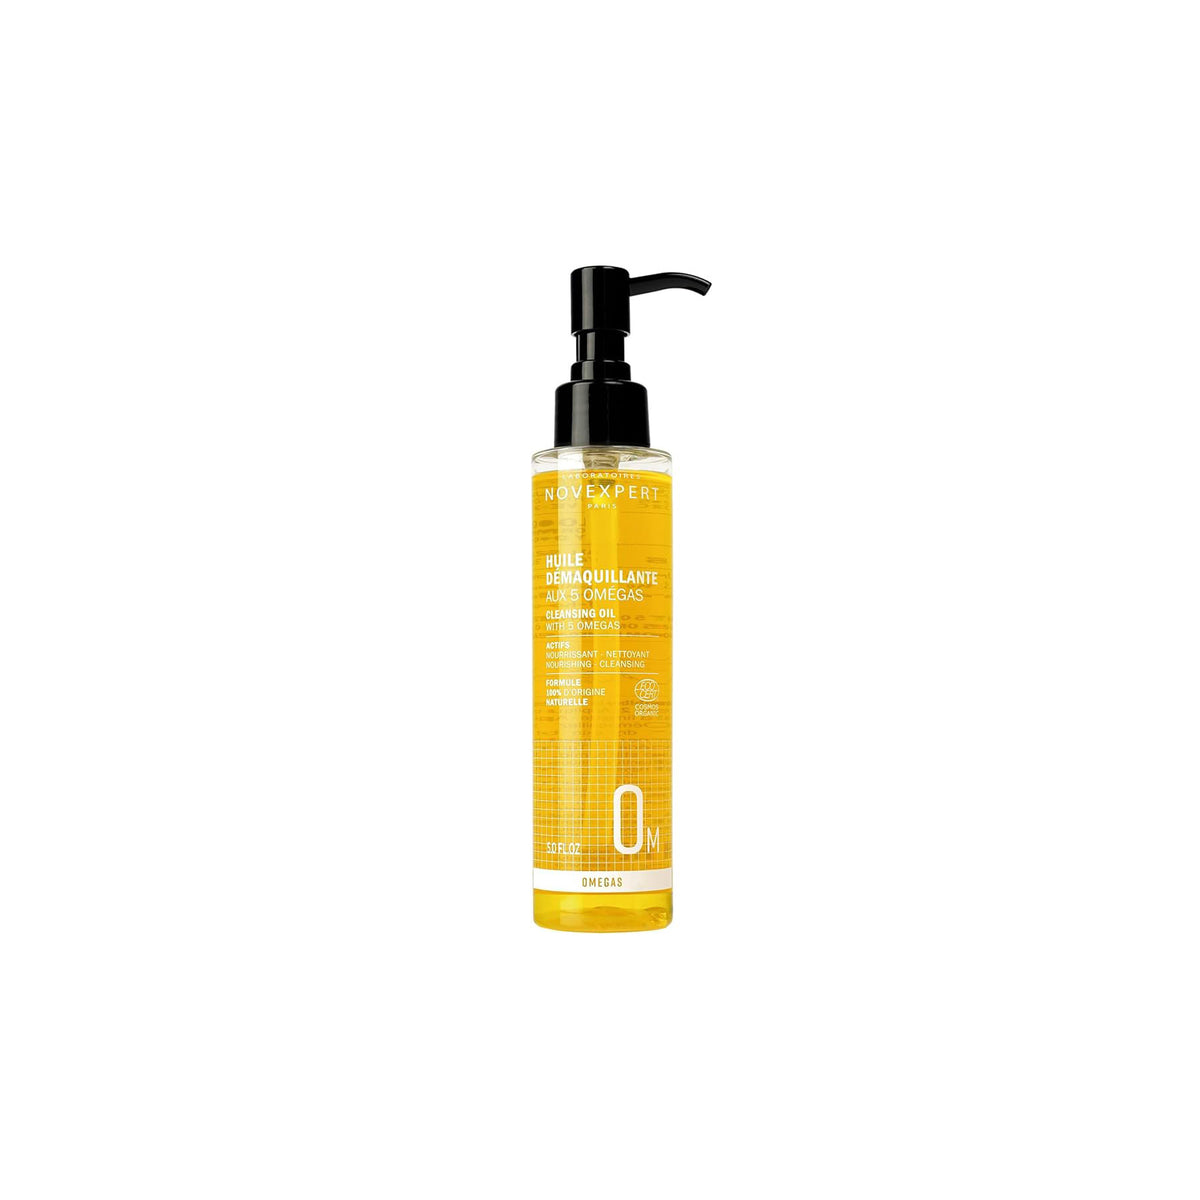 Novexpert Omega Cleansing Oil with 5 Omegas 150ml